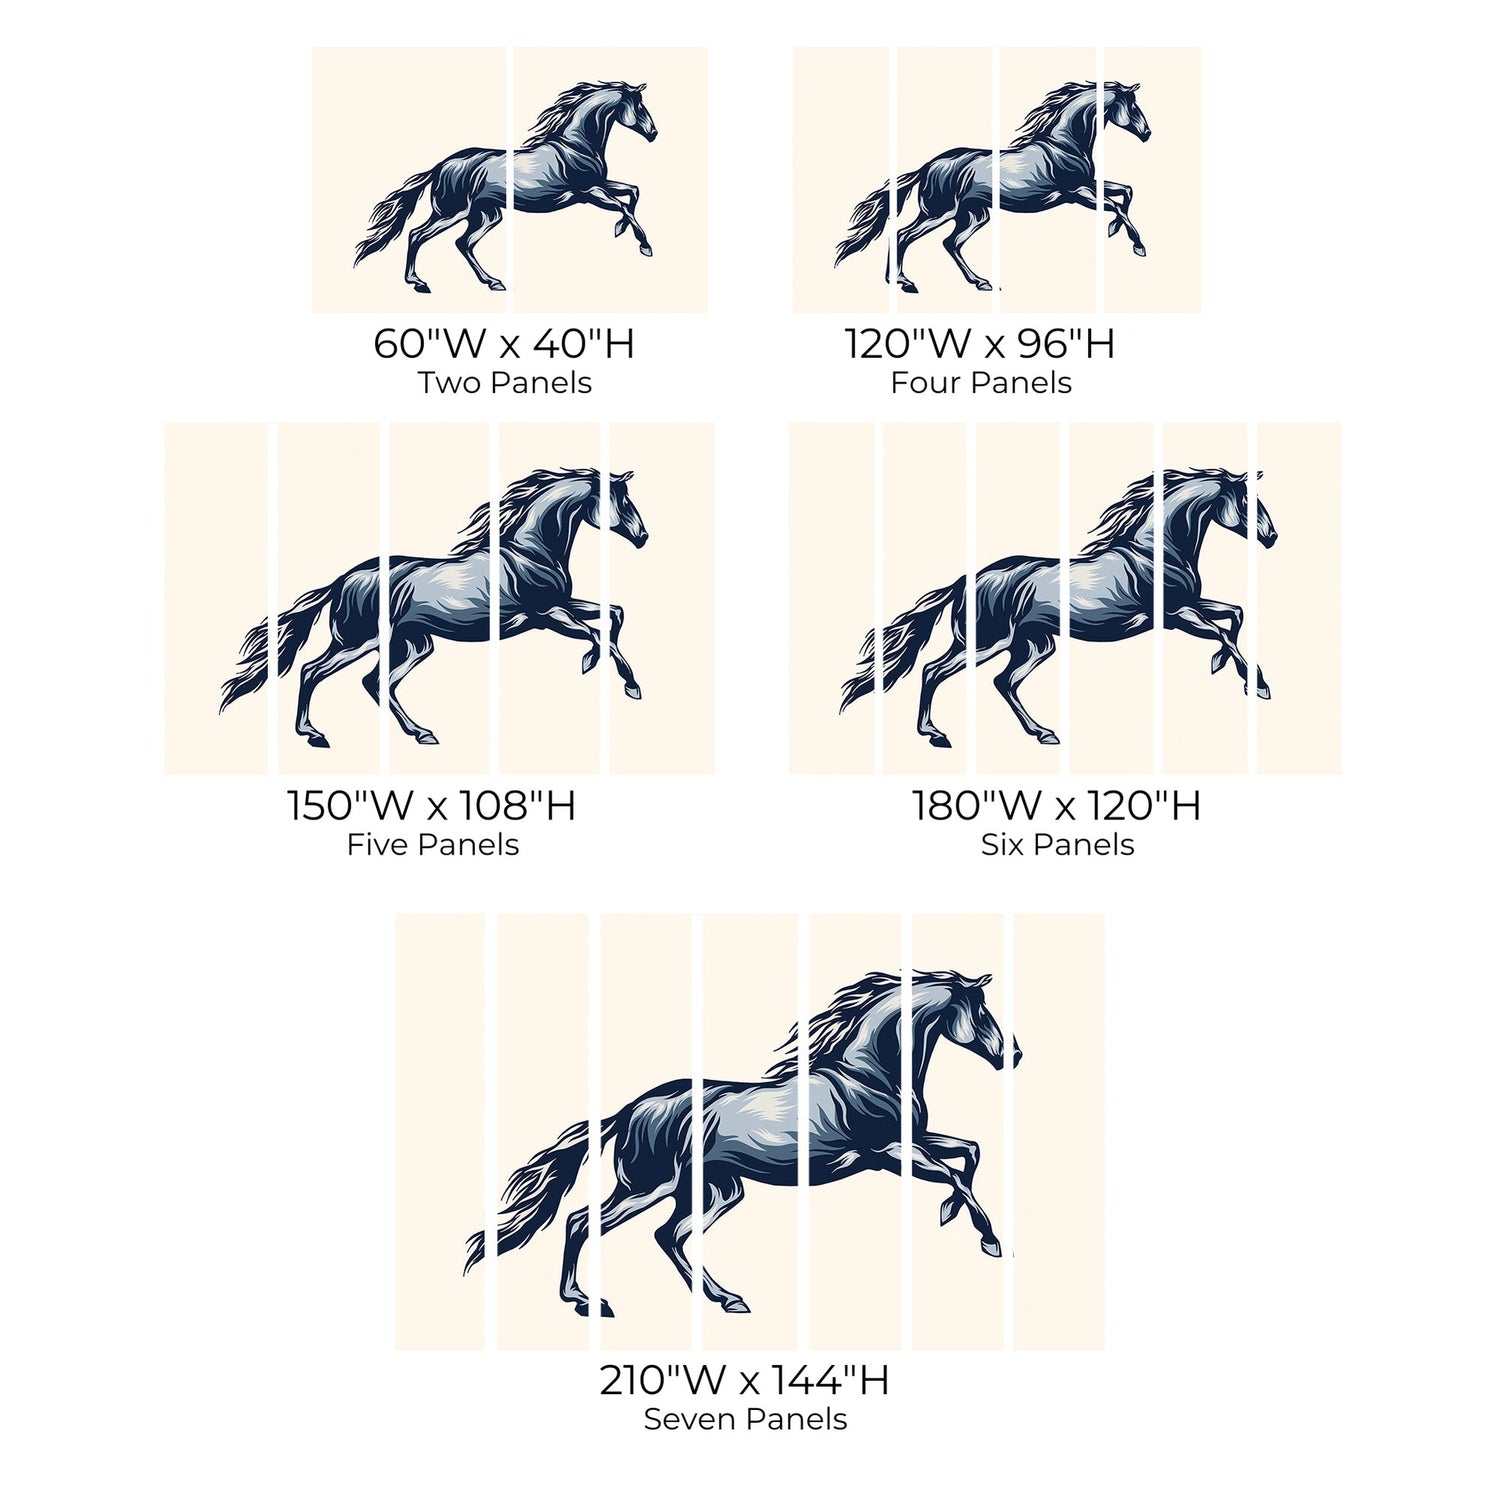 Different size options for a horse wall mural displayed in an interior setting.